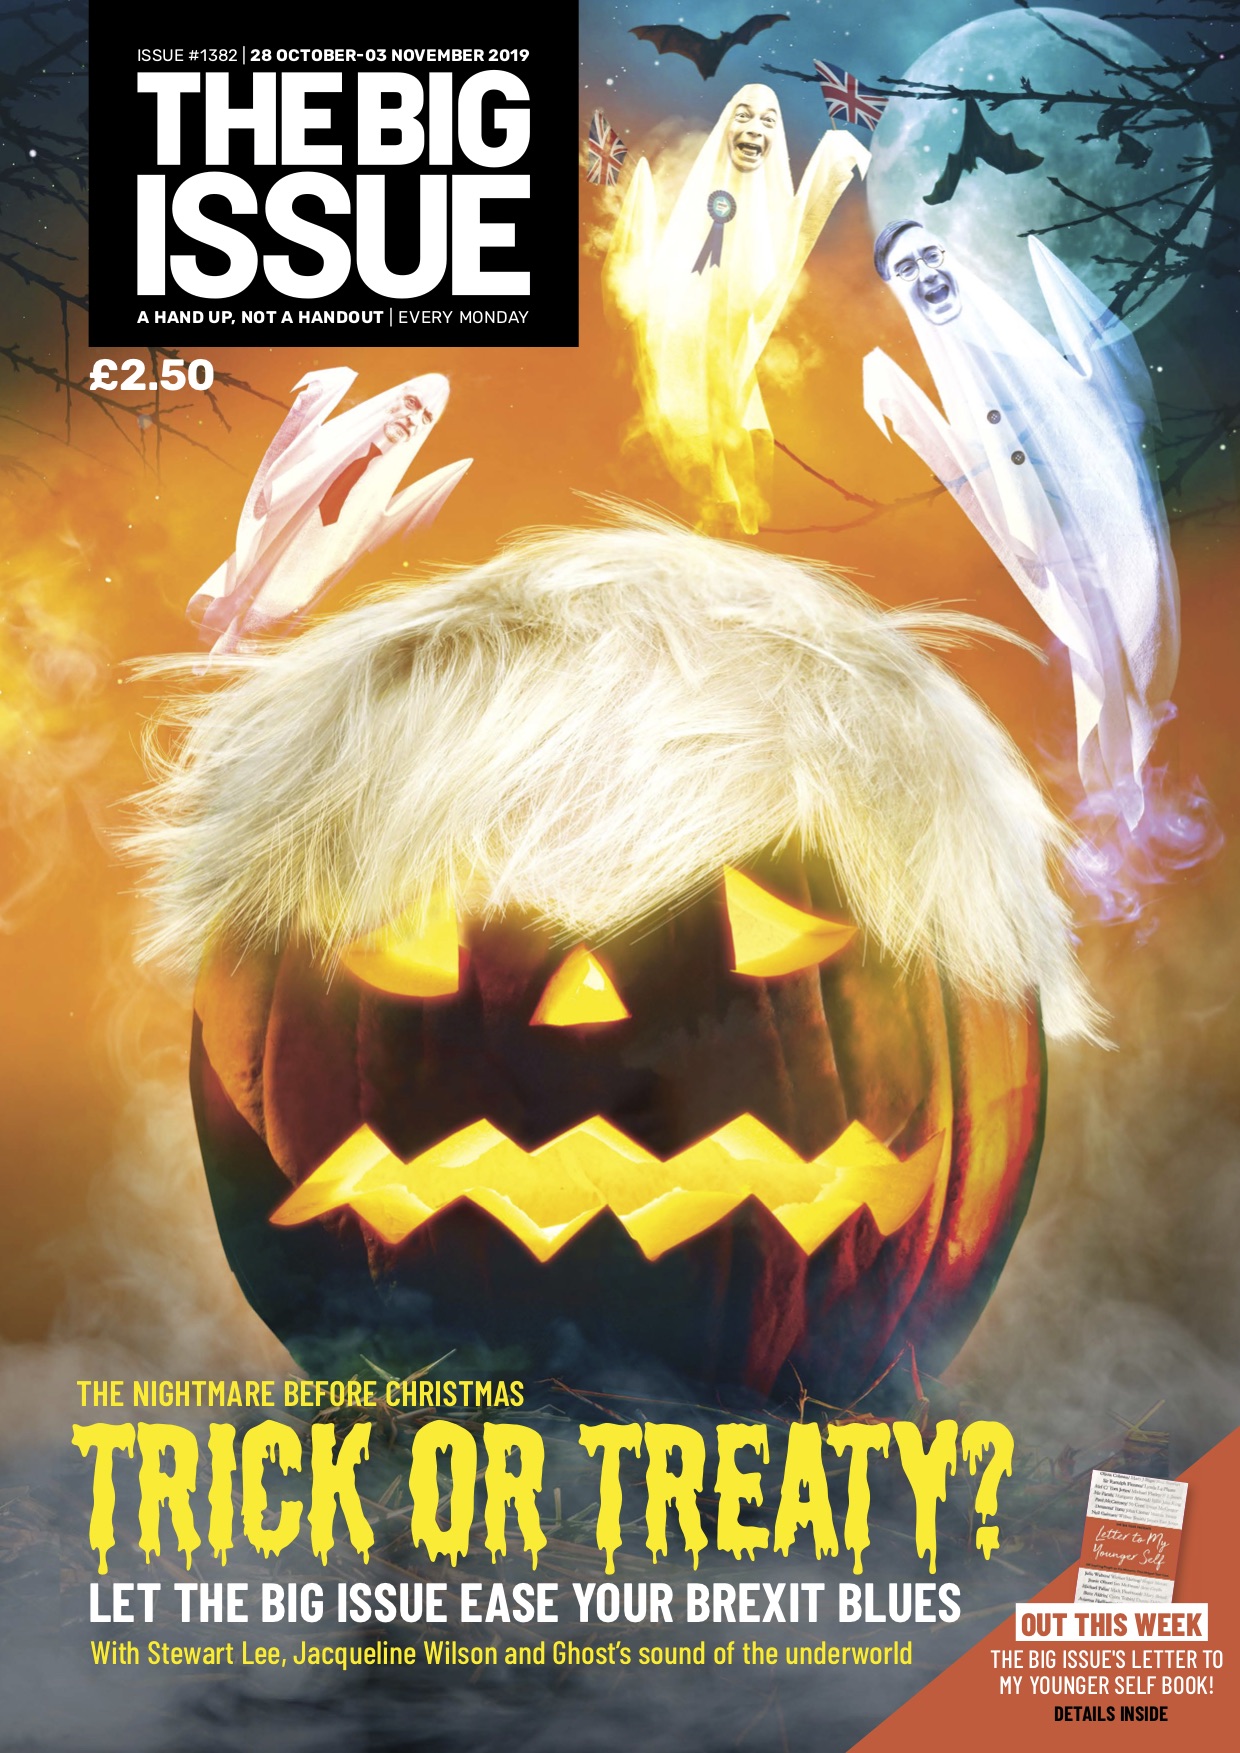 Boo! It’s this week’s Big Issue!